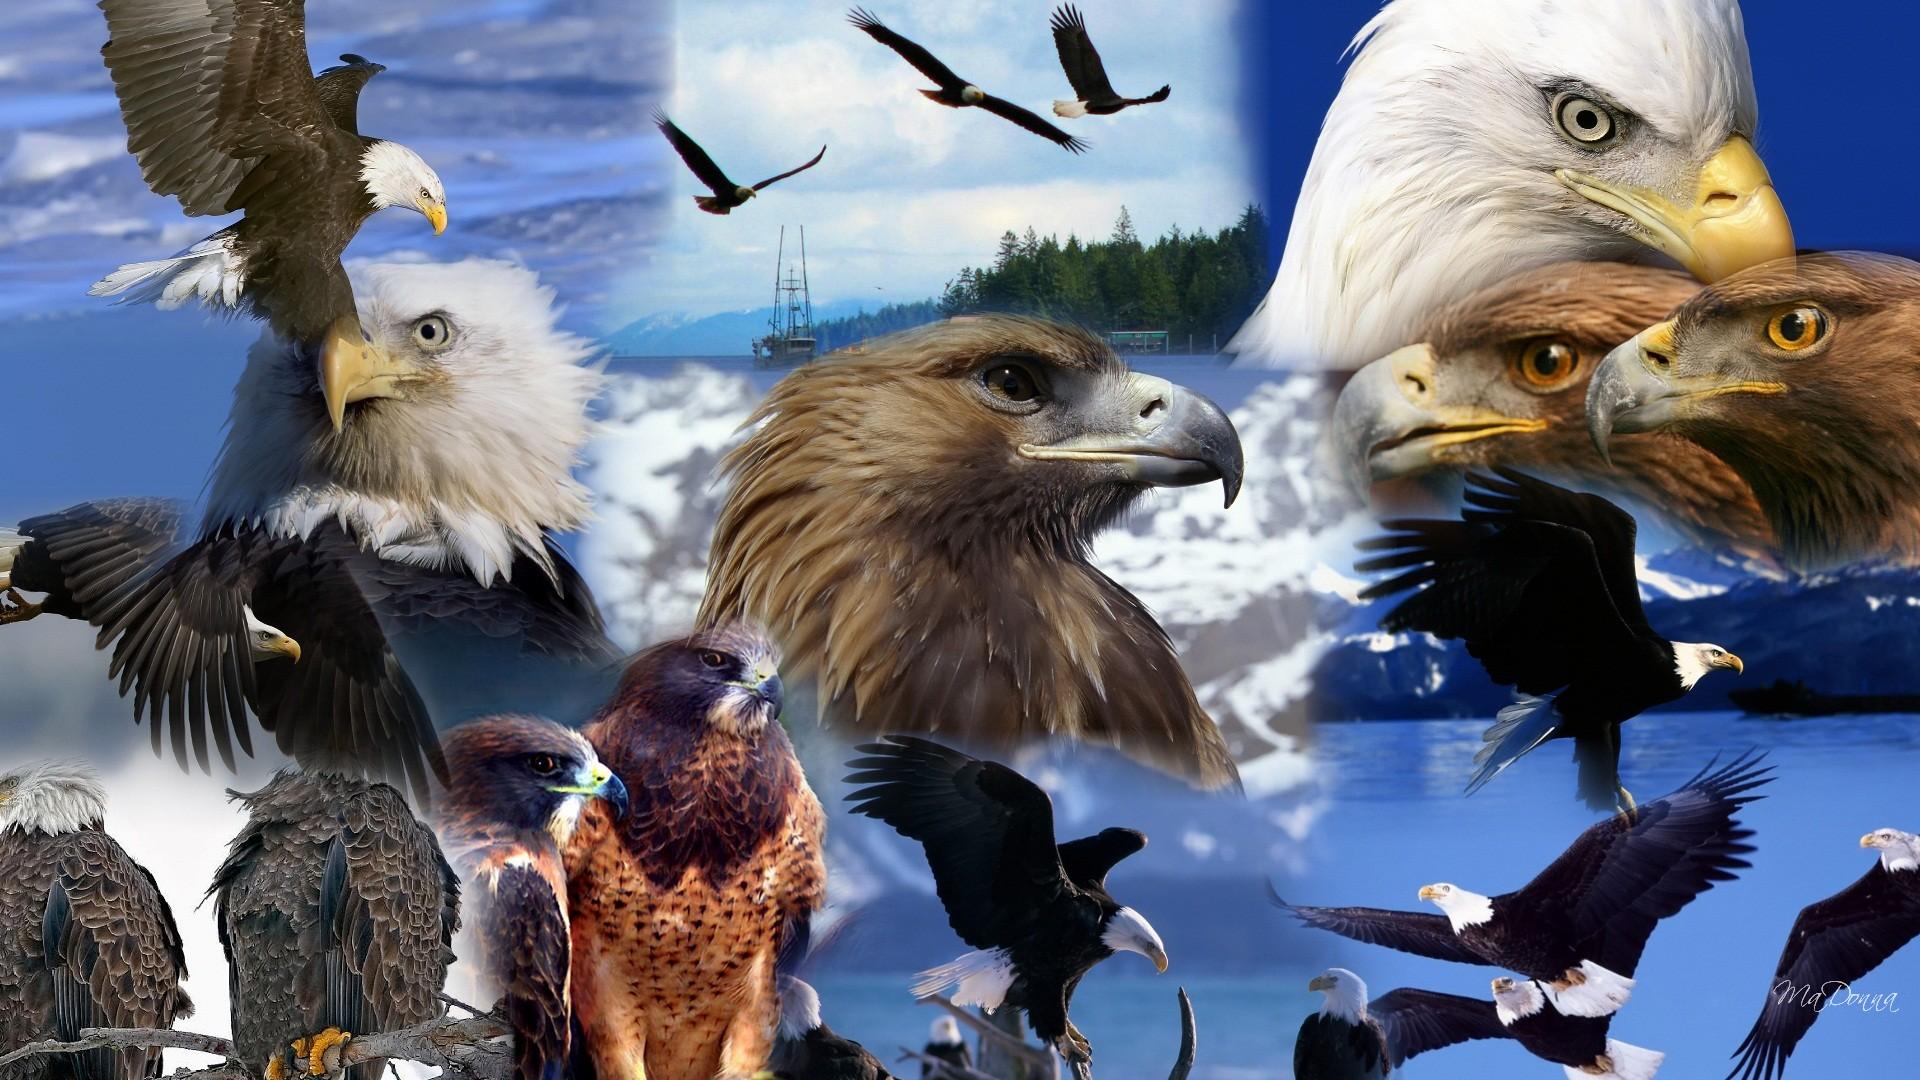 Download 1920x1080 Eagles Collage wallpaper